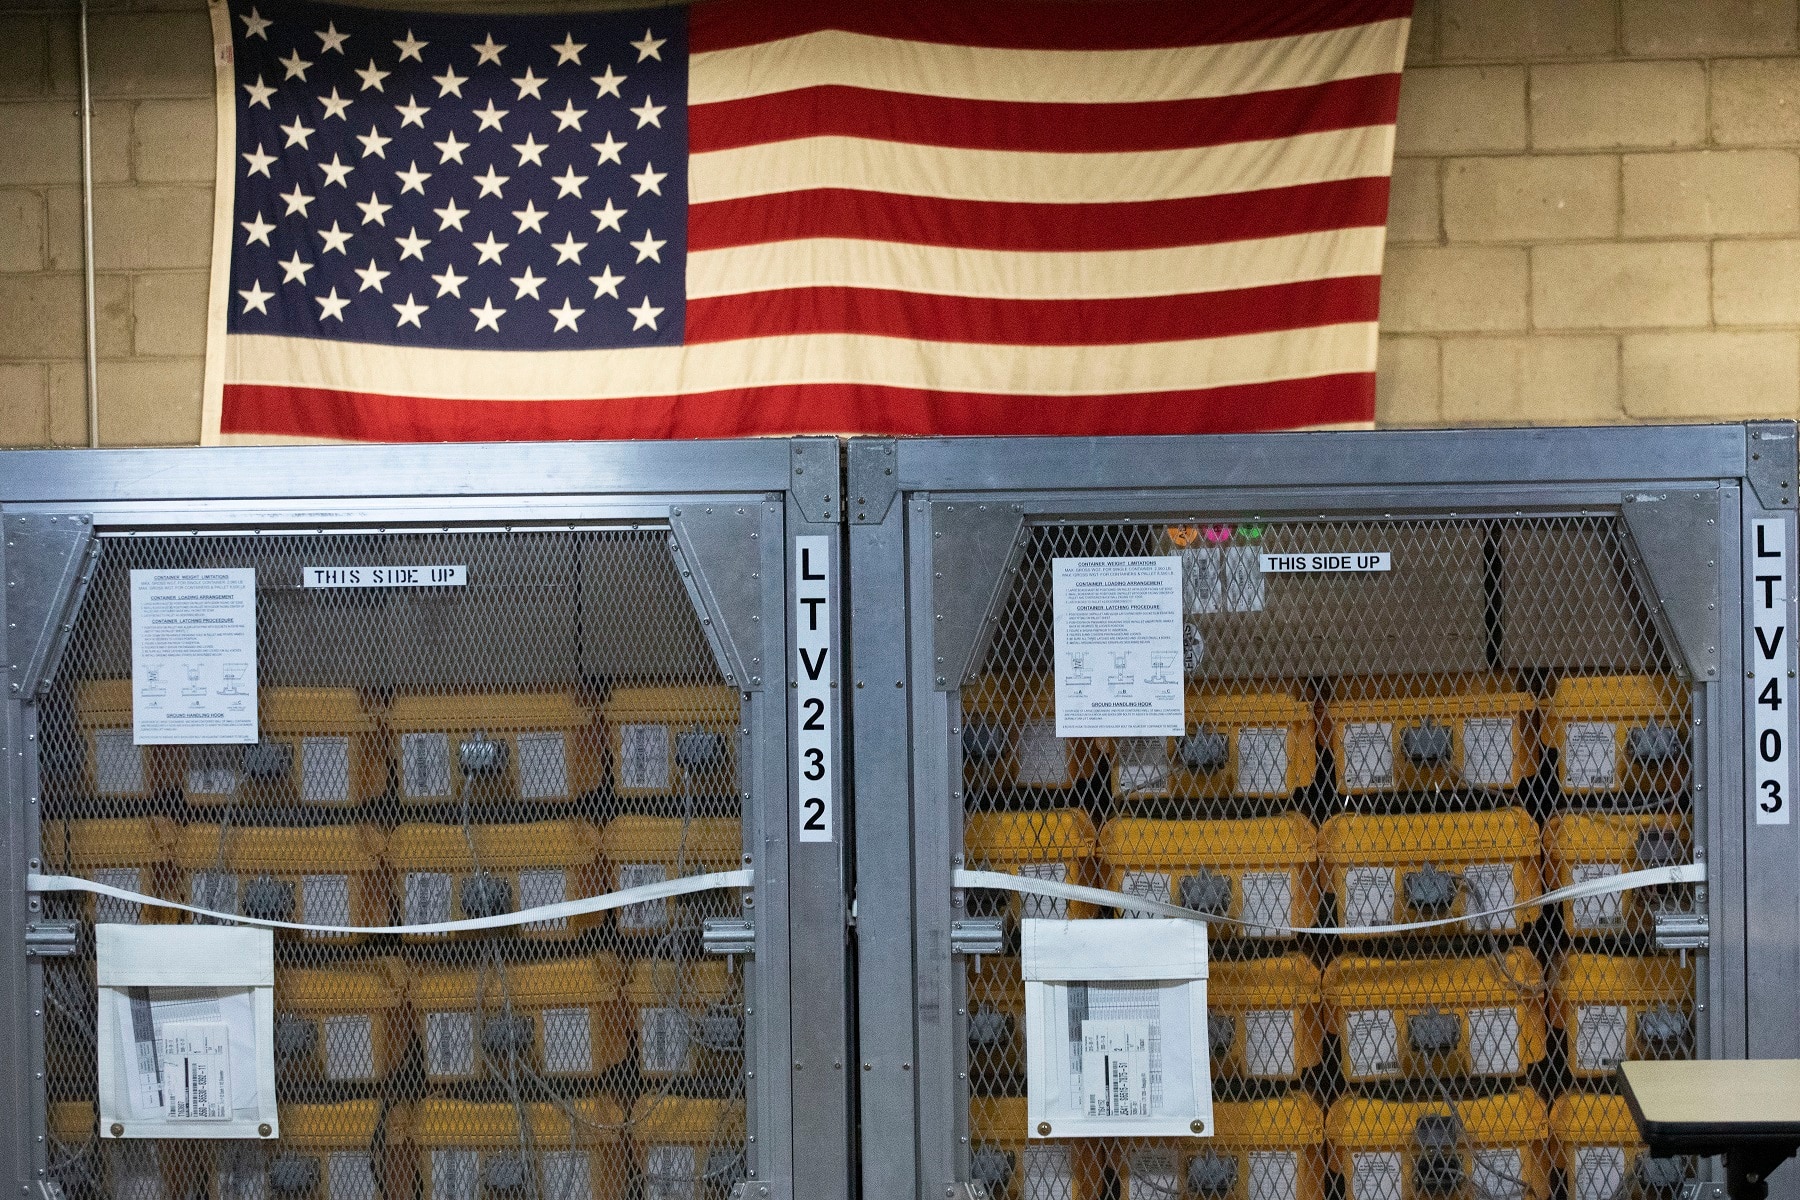 Cages of ventilators at the New York City Emergency Management Warehouse on 24 March 2020.